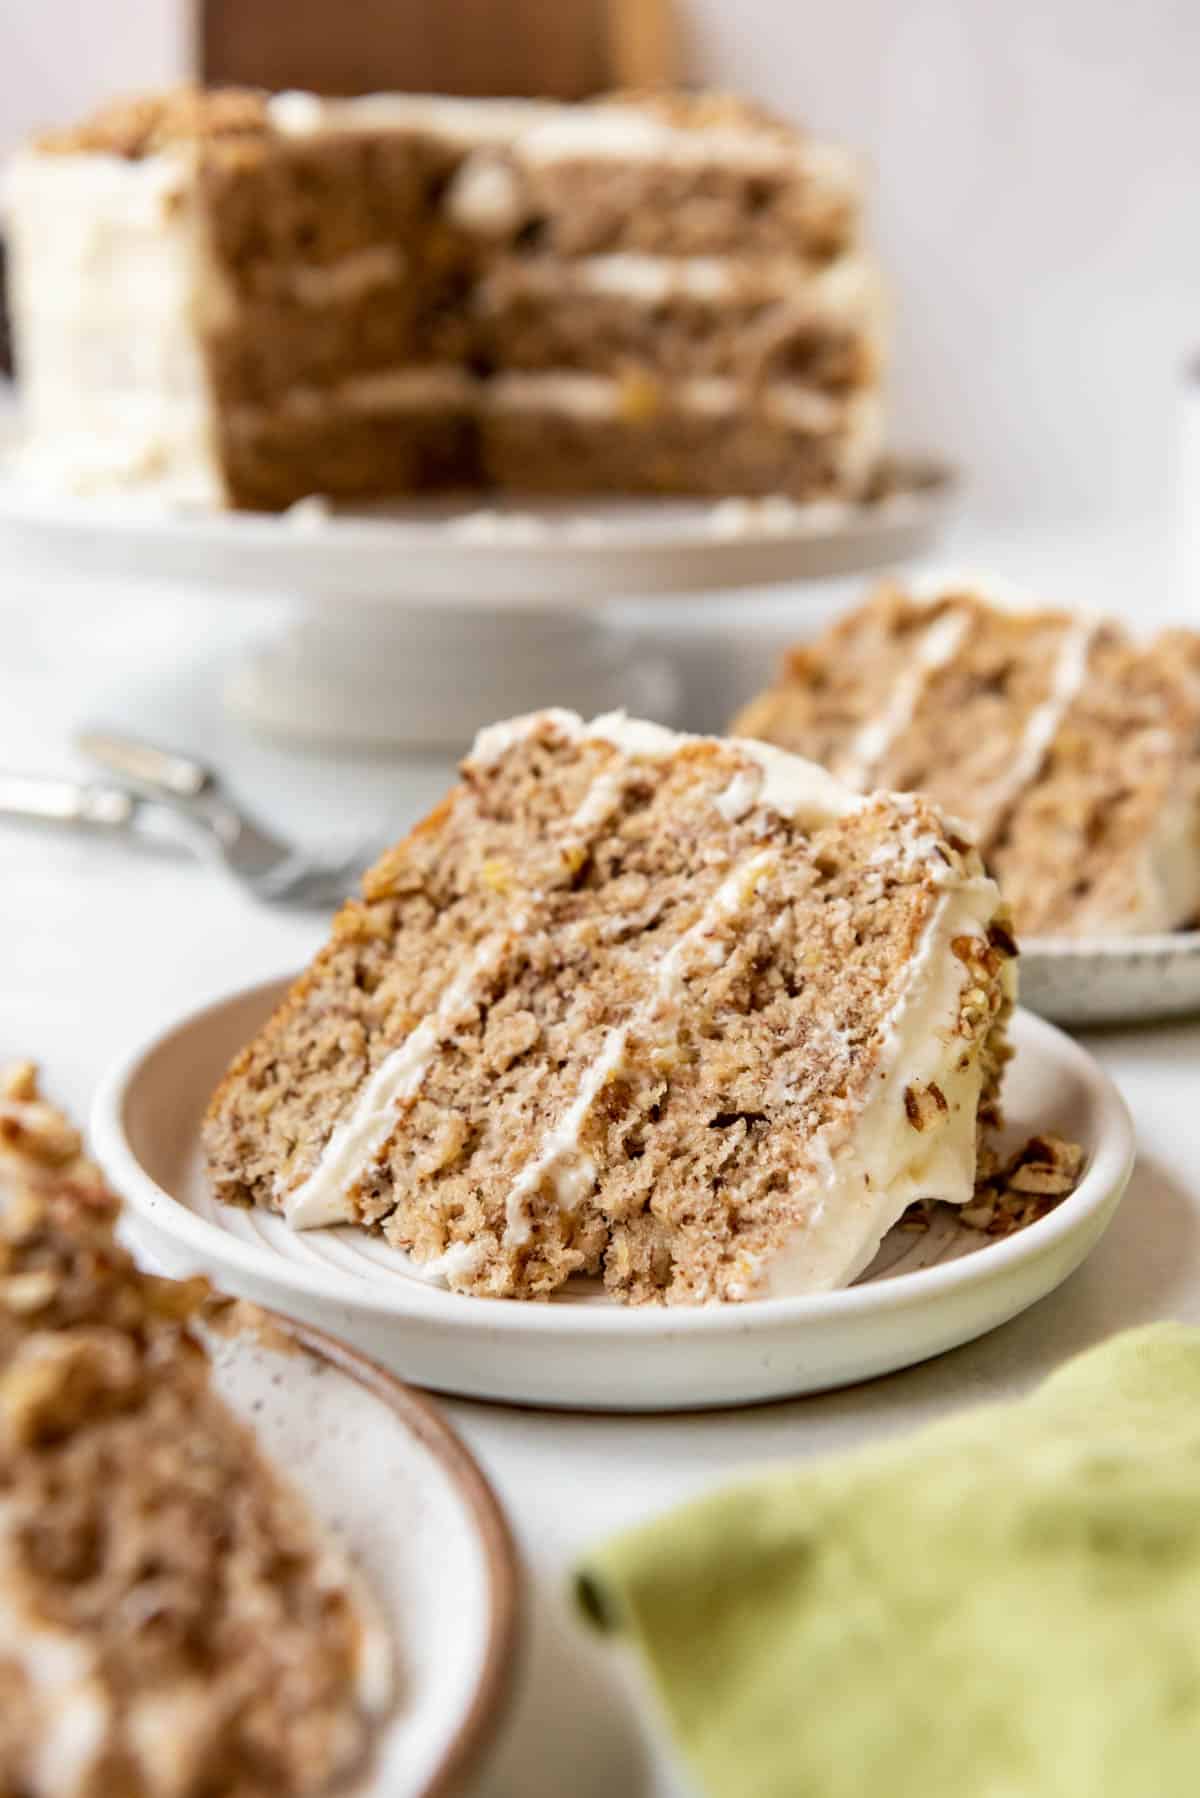 A slice of hummingbird cake on a white plate with the rest of the cake in the background and more plates of cake around it.